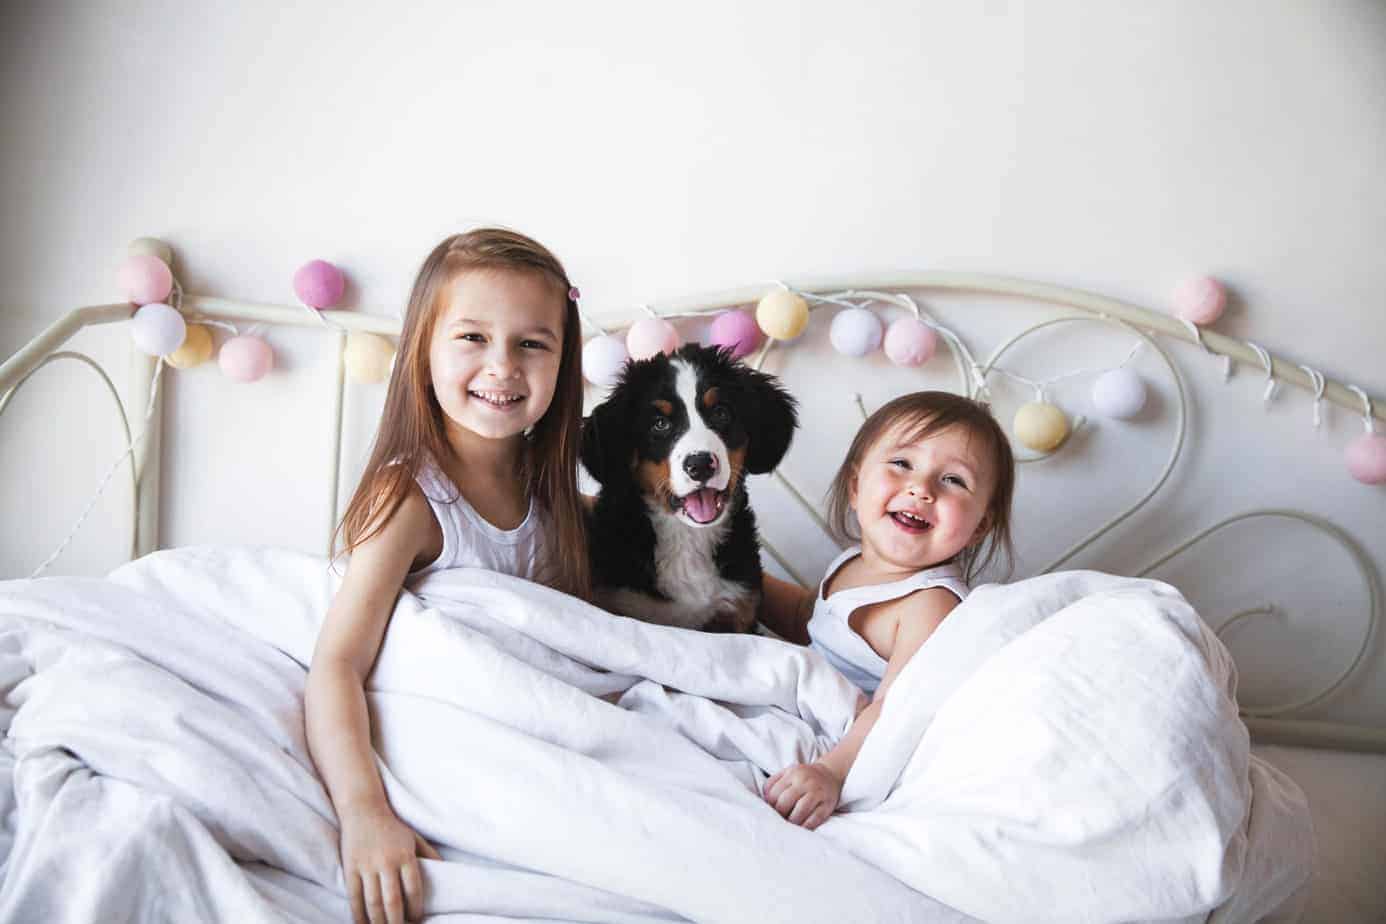 Two girls cuddle in bed with Bernese mountain dog puppy. The psychological benefits of owning a dog include teaching responsibility.